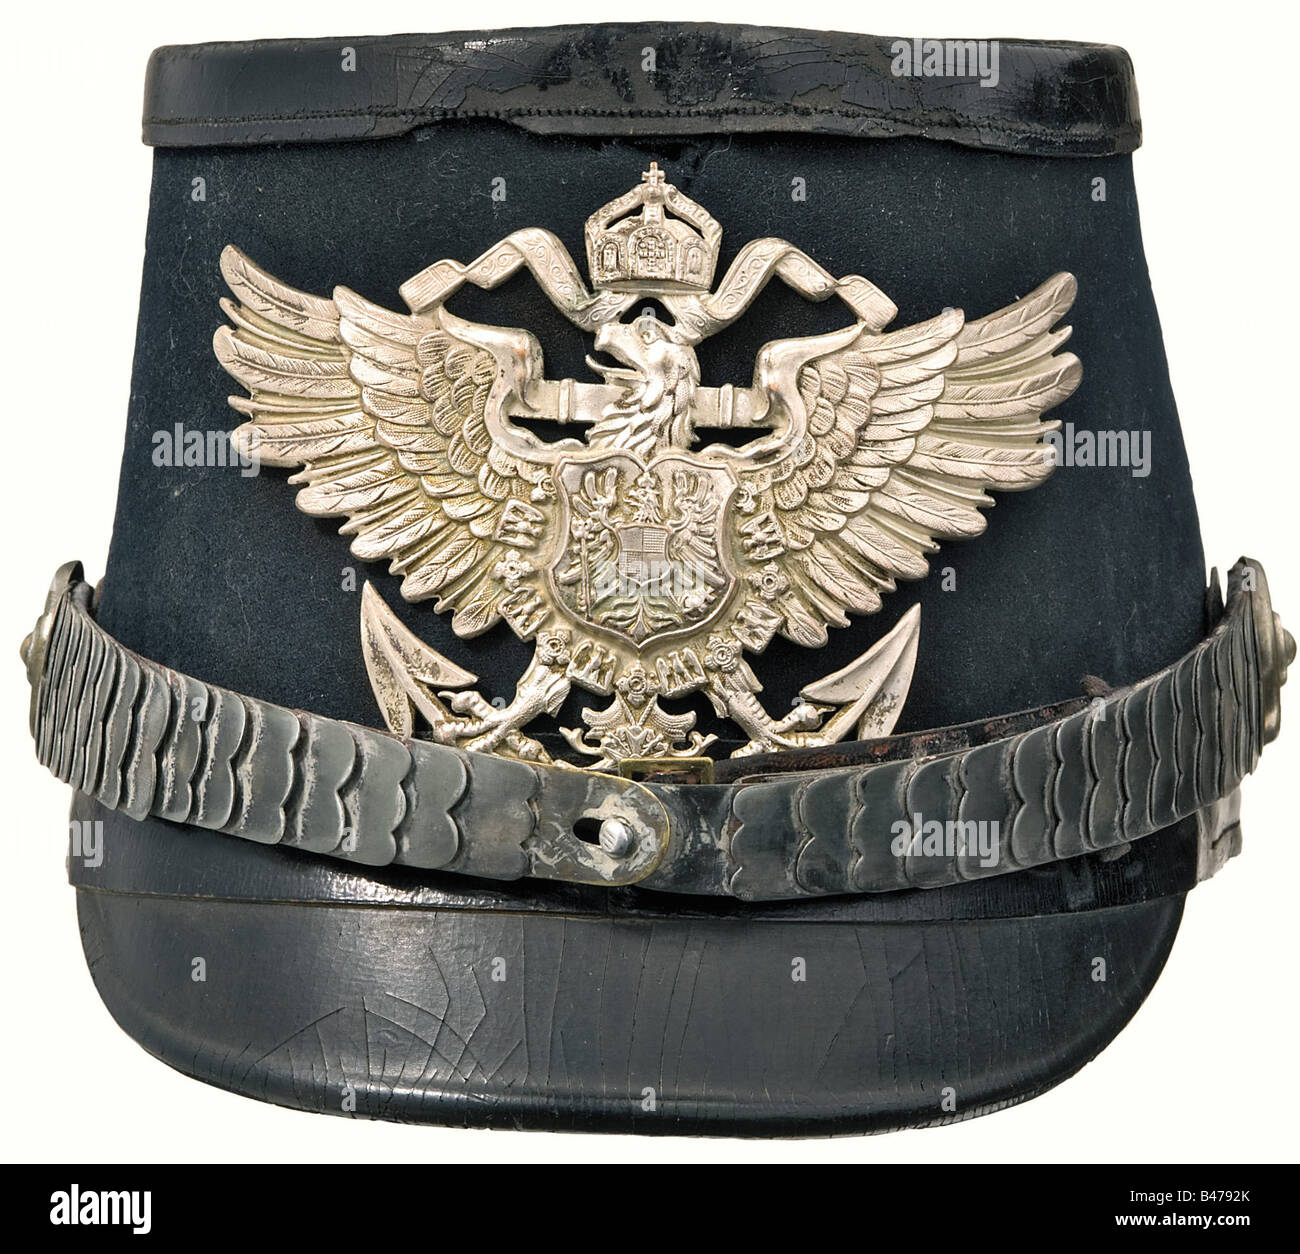 A shako with silver mountings for marine officers., Cloth covered leather body, peaks, lower band, and top are black lacquered (rear peak porous). Silver plated eagle plate and metal chinscales. Ventilation mesh on the sides. Field insignia missing. Champagne coloured ribbed silk lining. Leather sweatband. An old Shako with all the original pieces. Possibly belonging to an official, although normally they wore the general naval uniform. historic, historical, 1900s, 1910s, 20th century, navy, naval forces, military, militaria, branch of service, branches of serv, Stock Photo